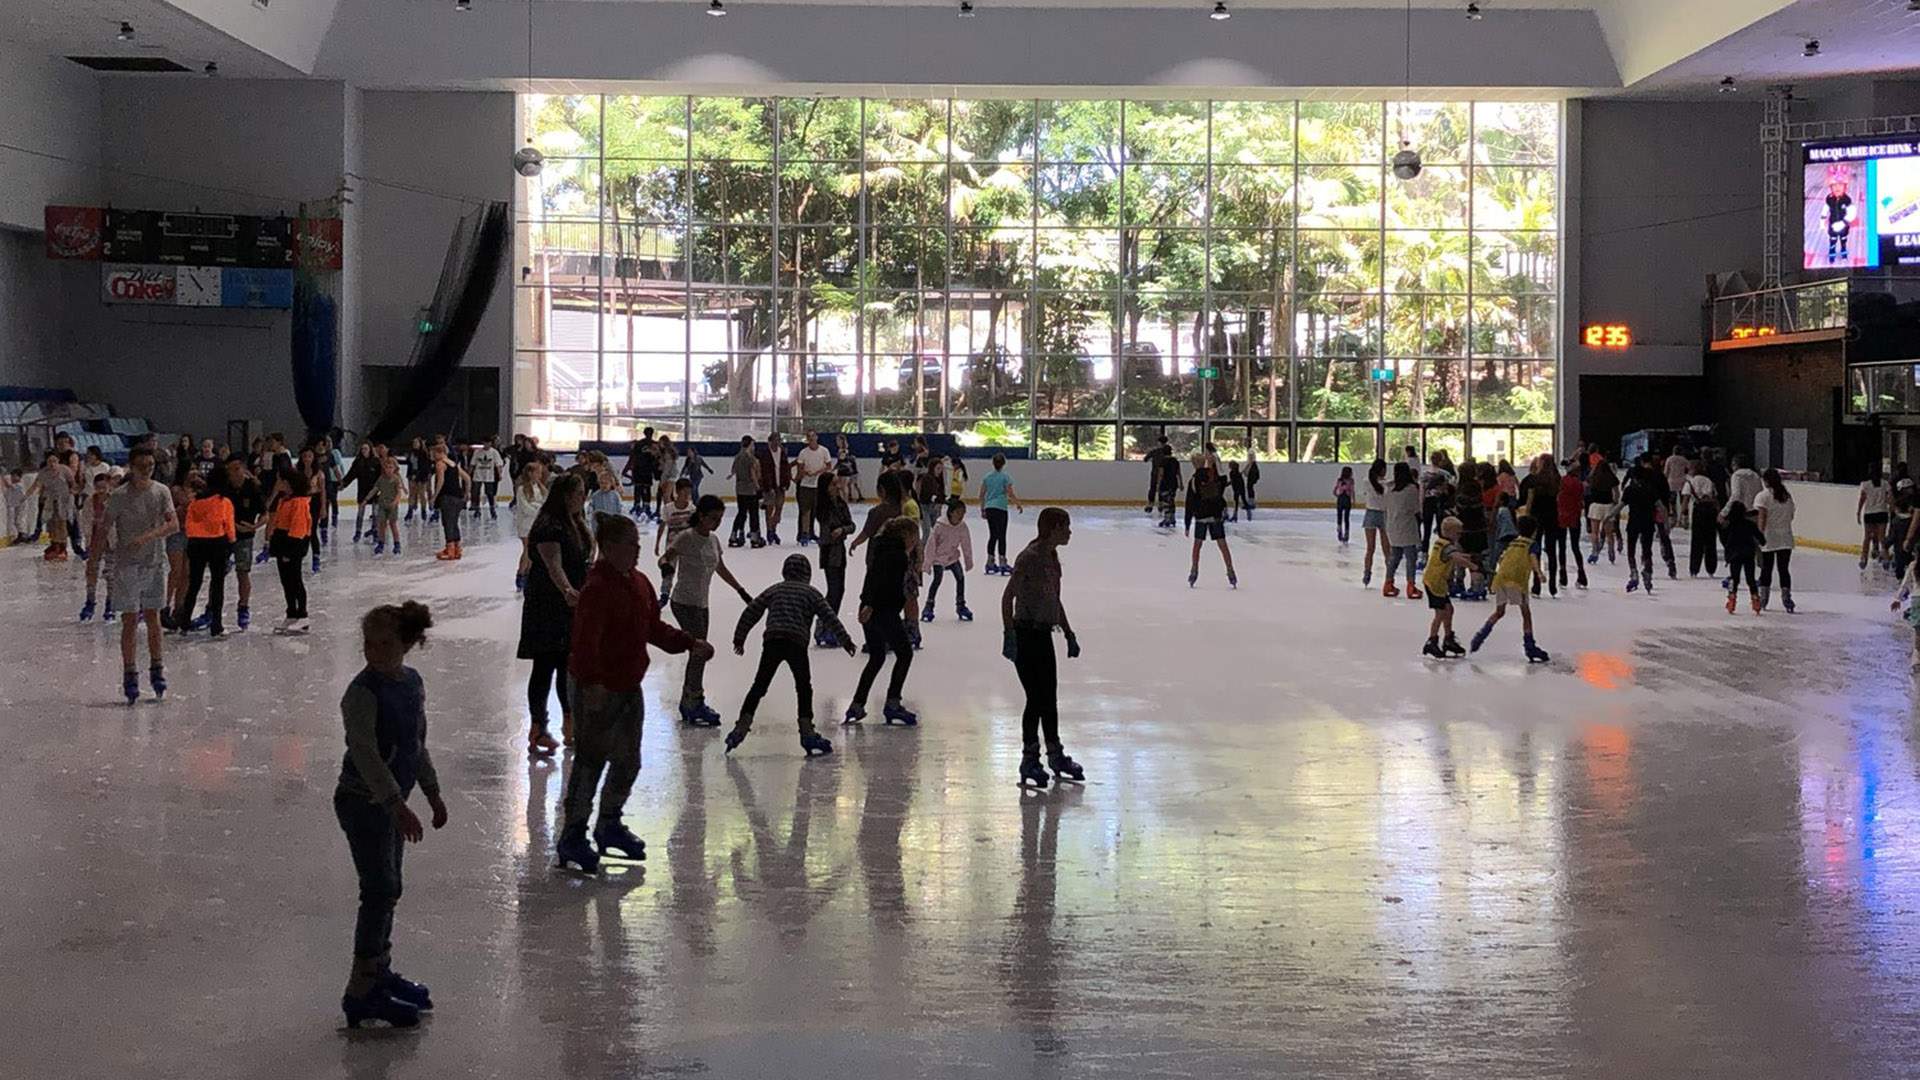 North Ryde's Beloved Macquarie Ice Rink Has Been Saved From Demolition